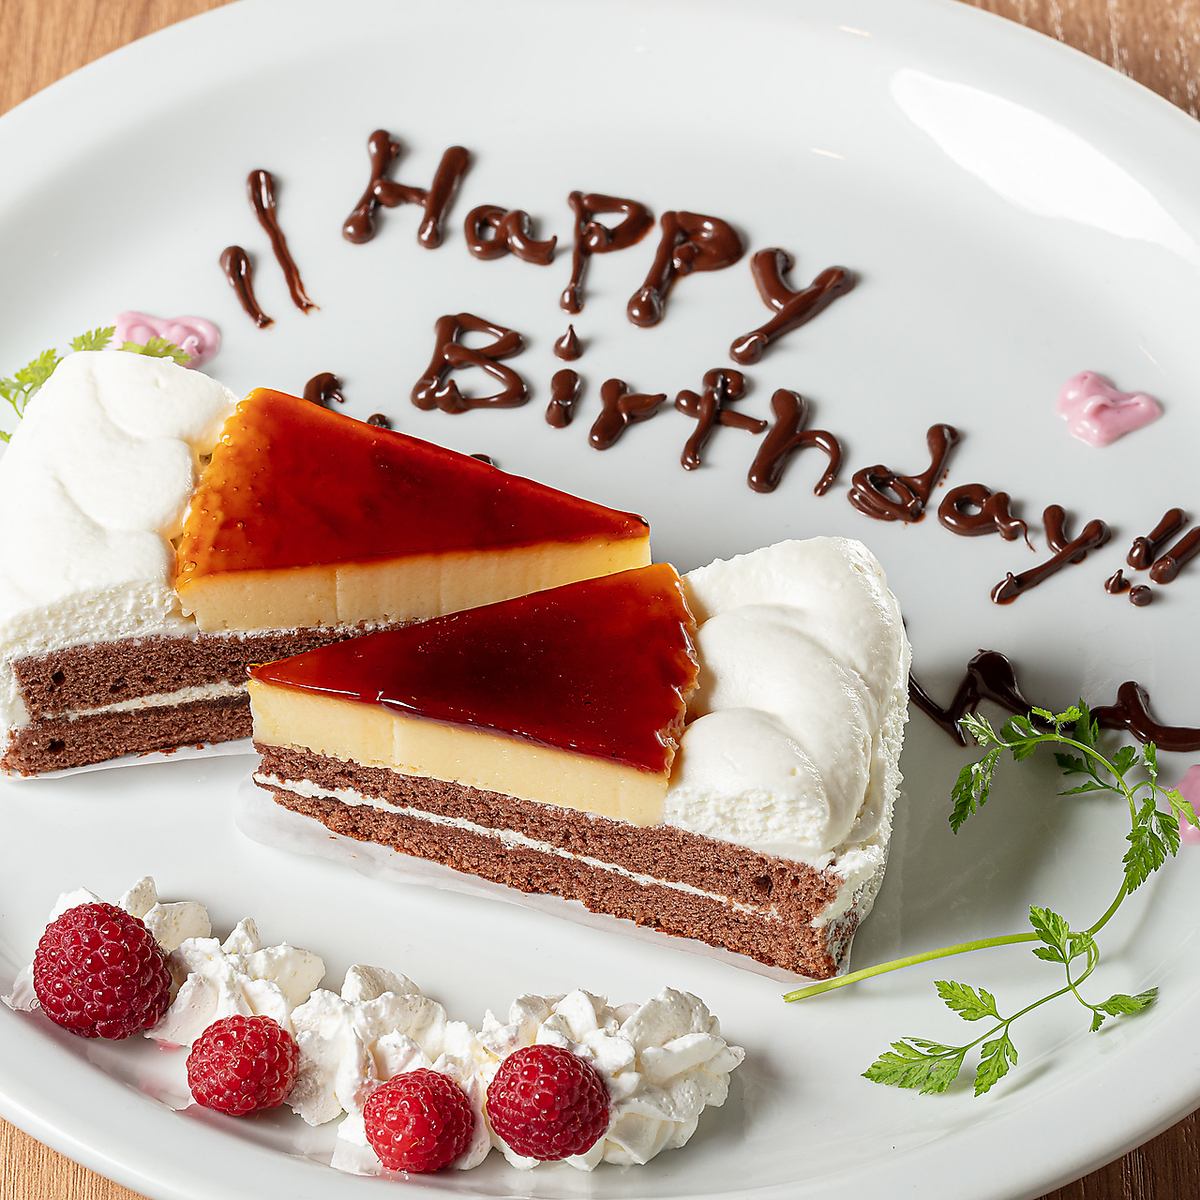 We will provide a plate to customers who make reservations for birthdays and anniversaries.